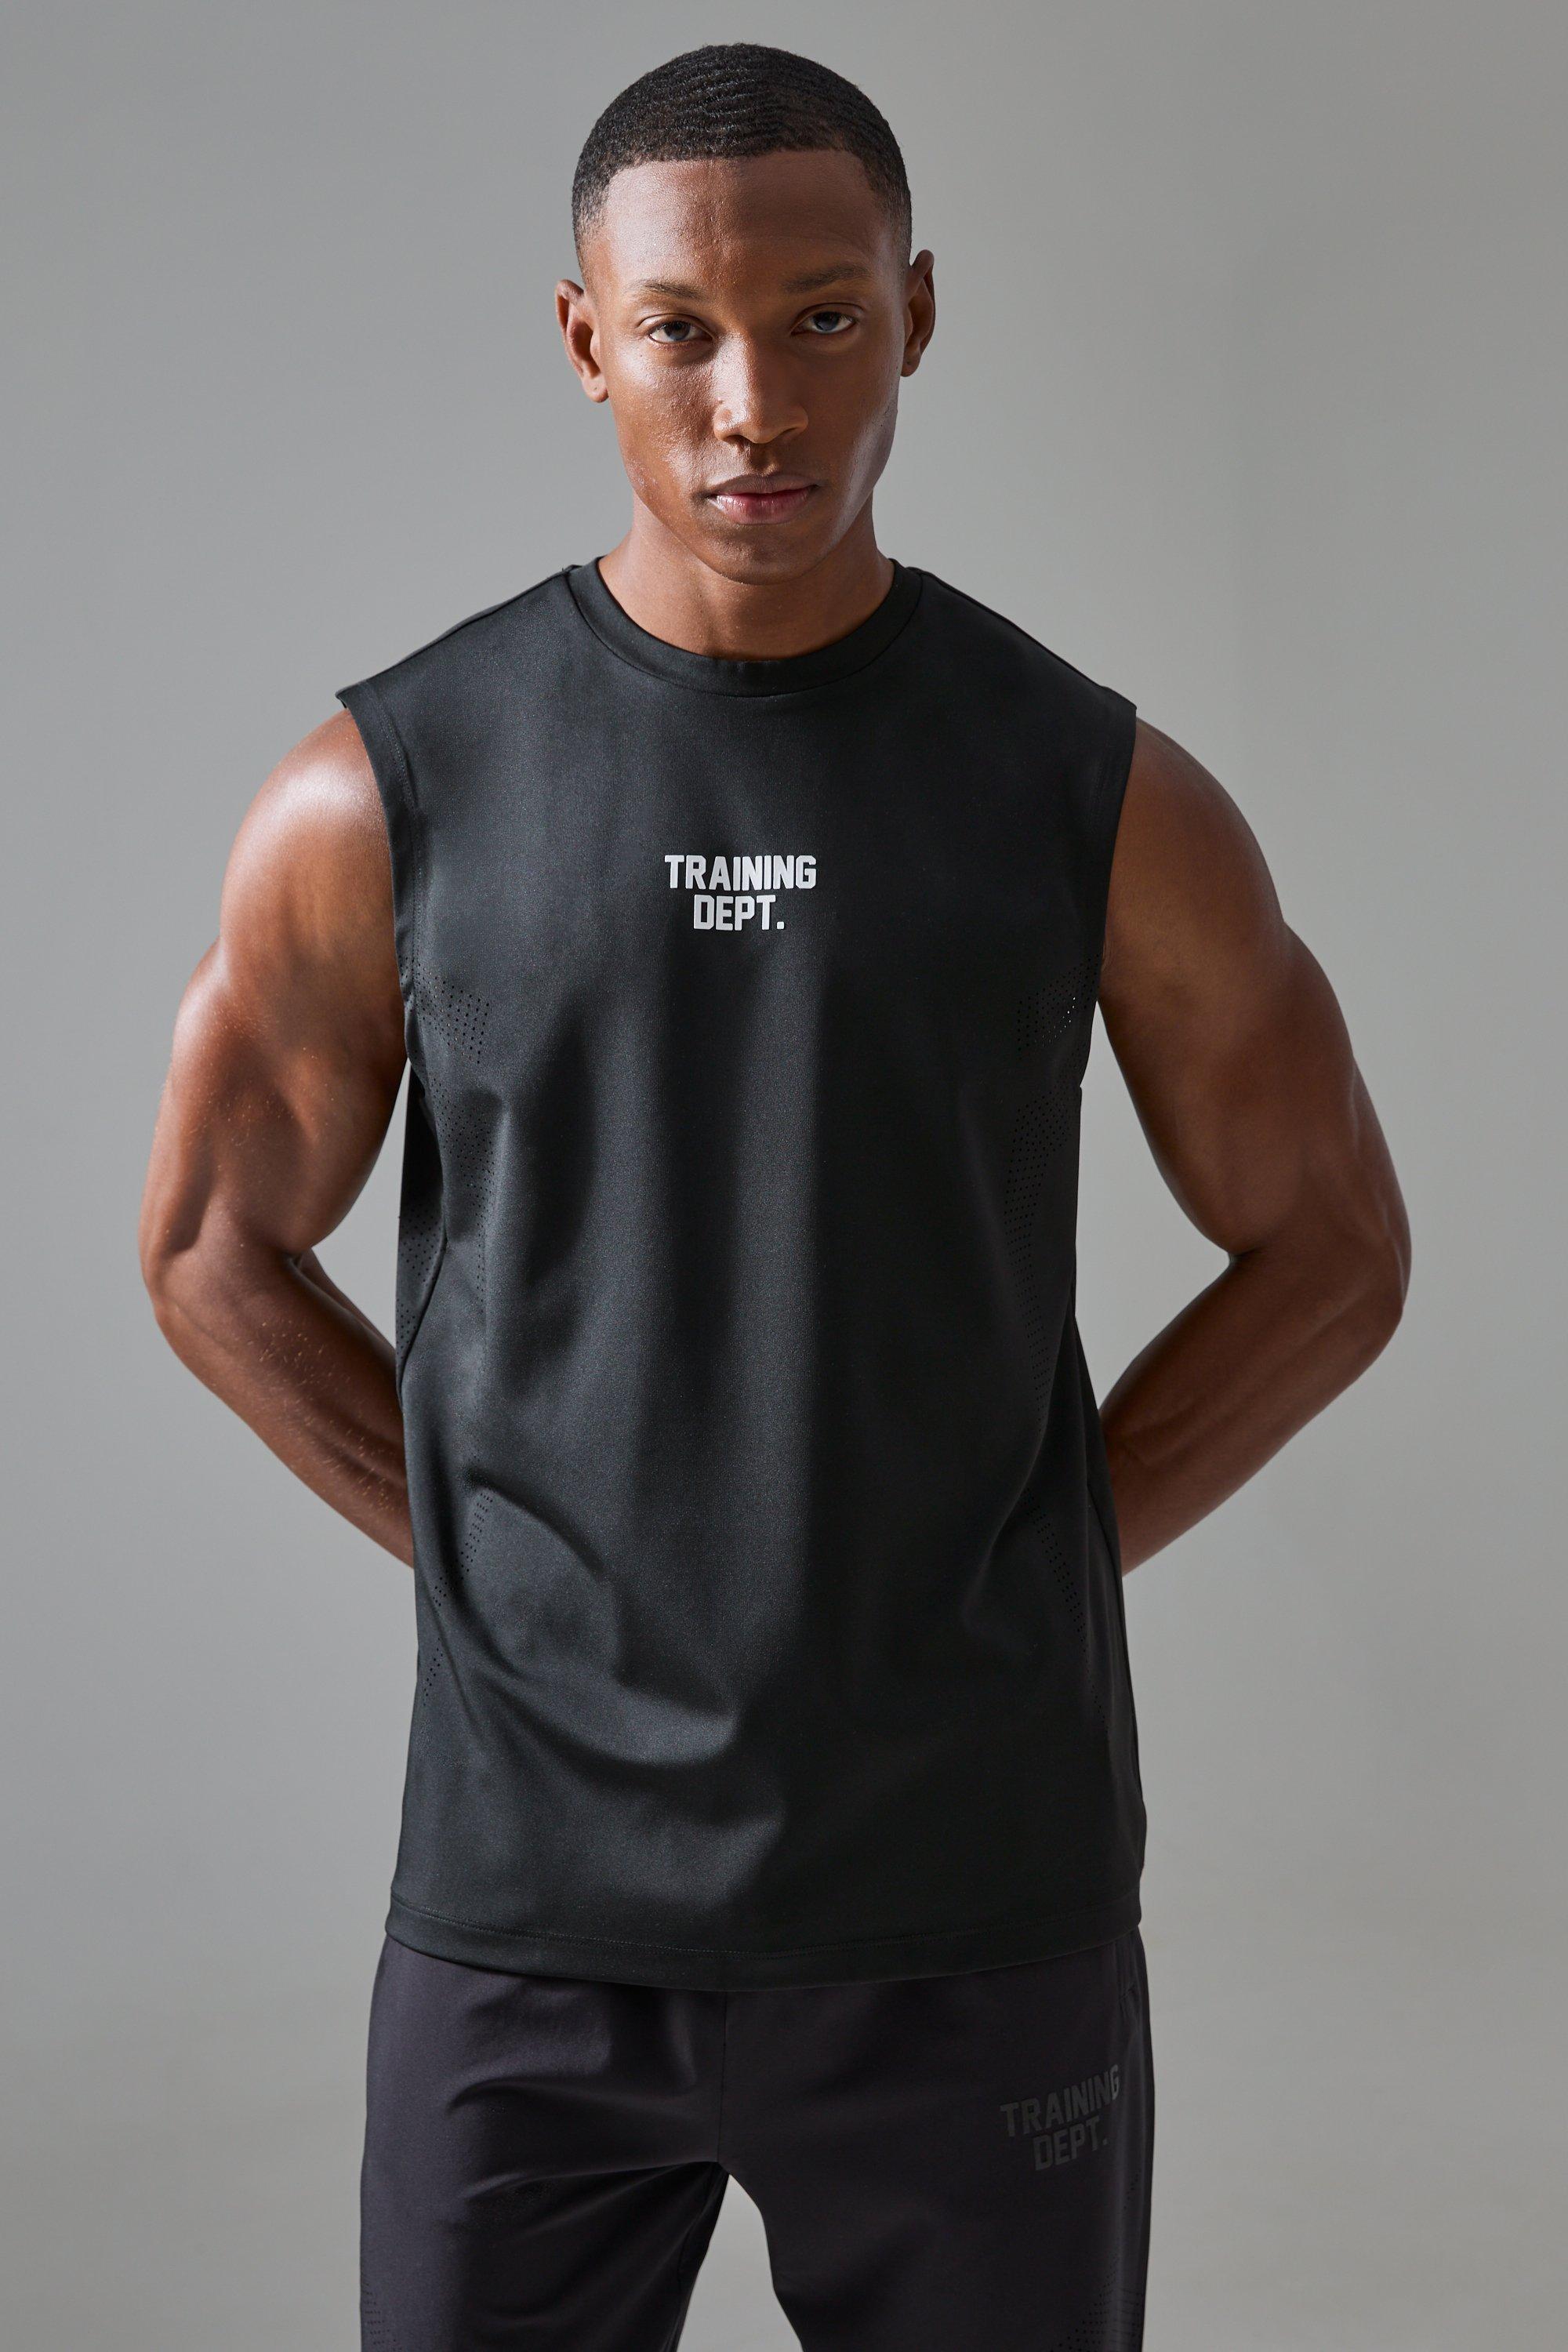 Image of Active Training Dept Perforated Performance Tank, Nero